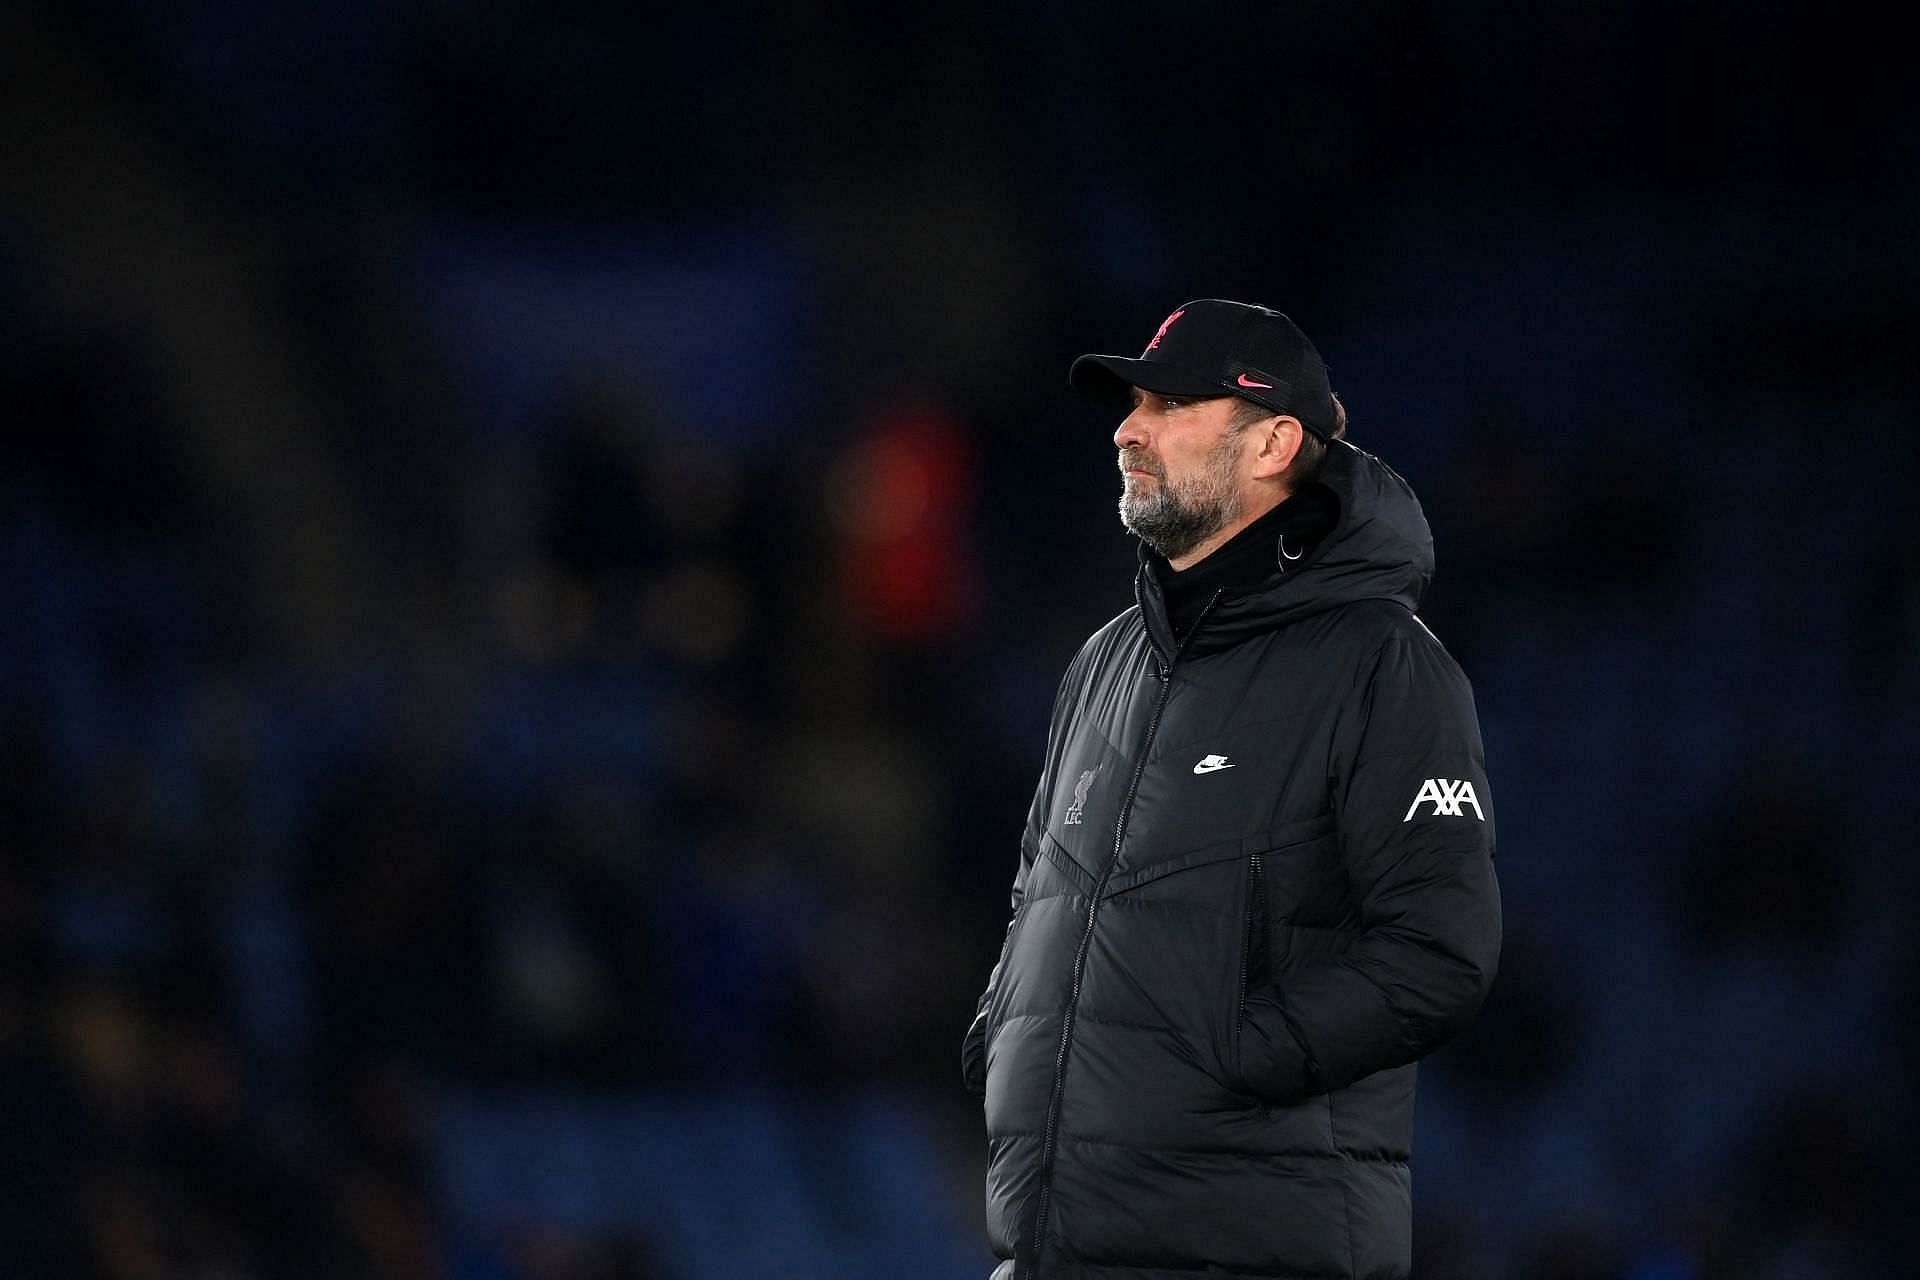 Reds manager Jurgen Klopp looks on during a game.